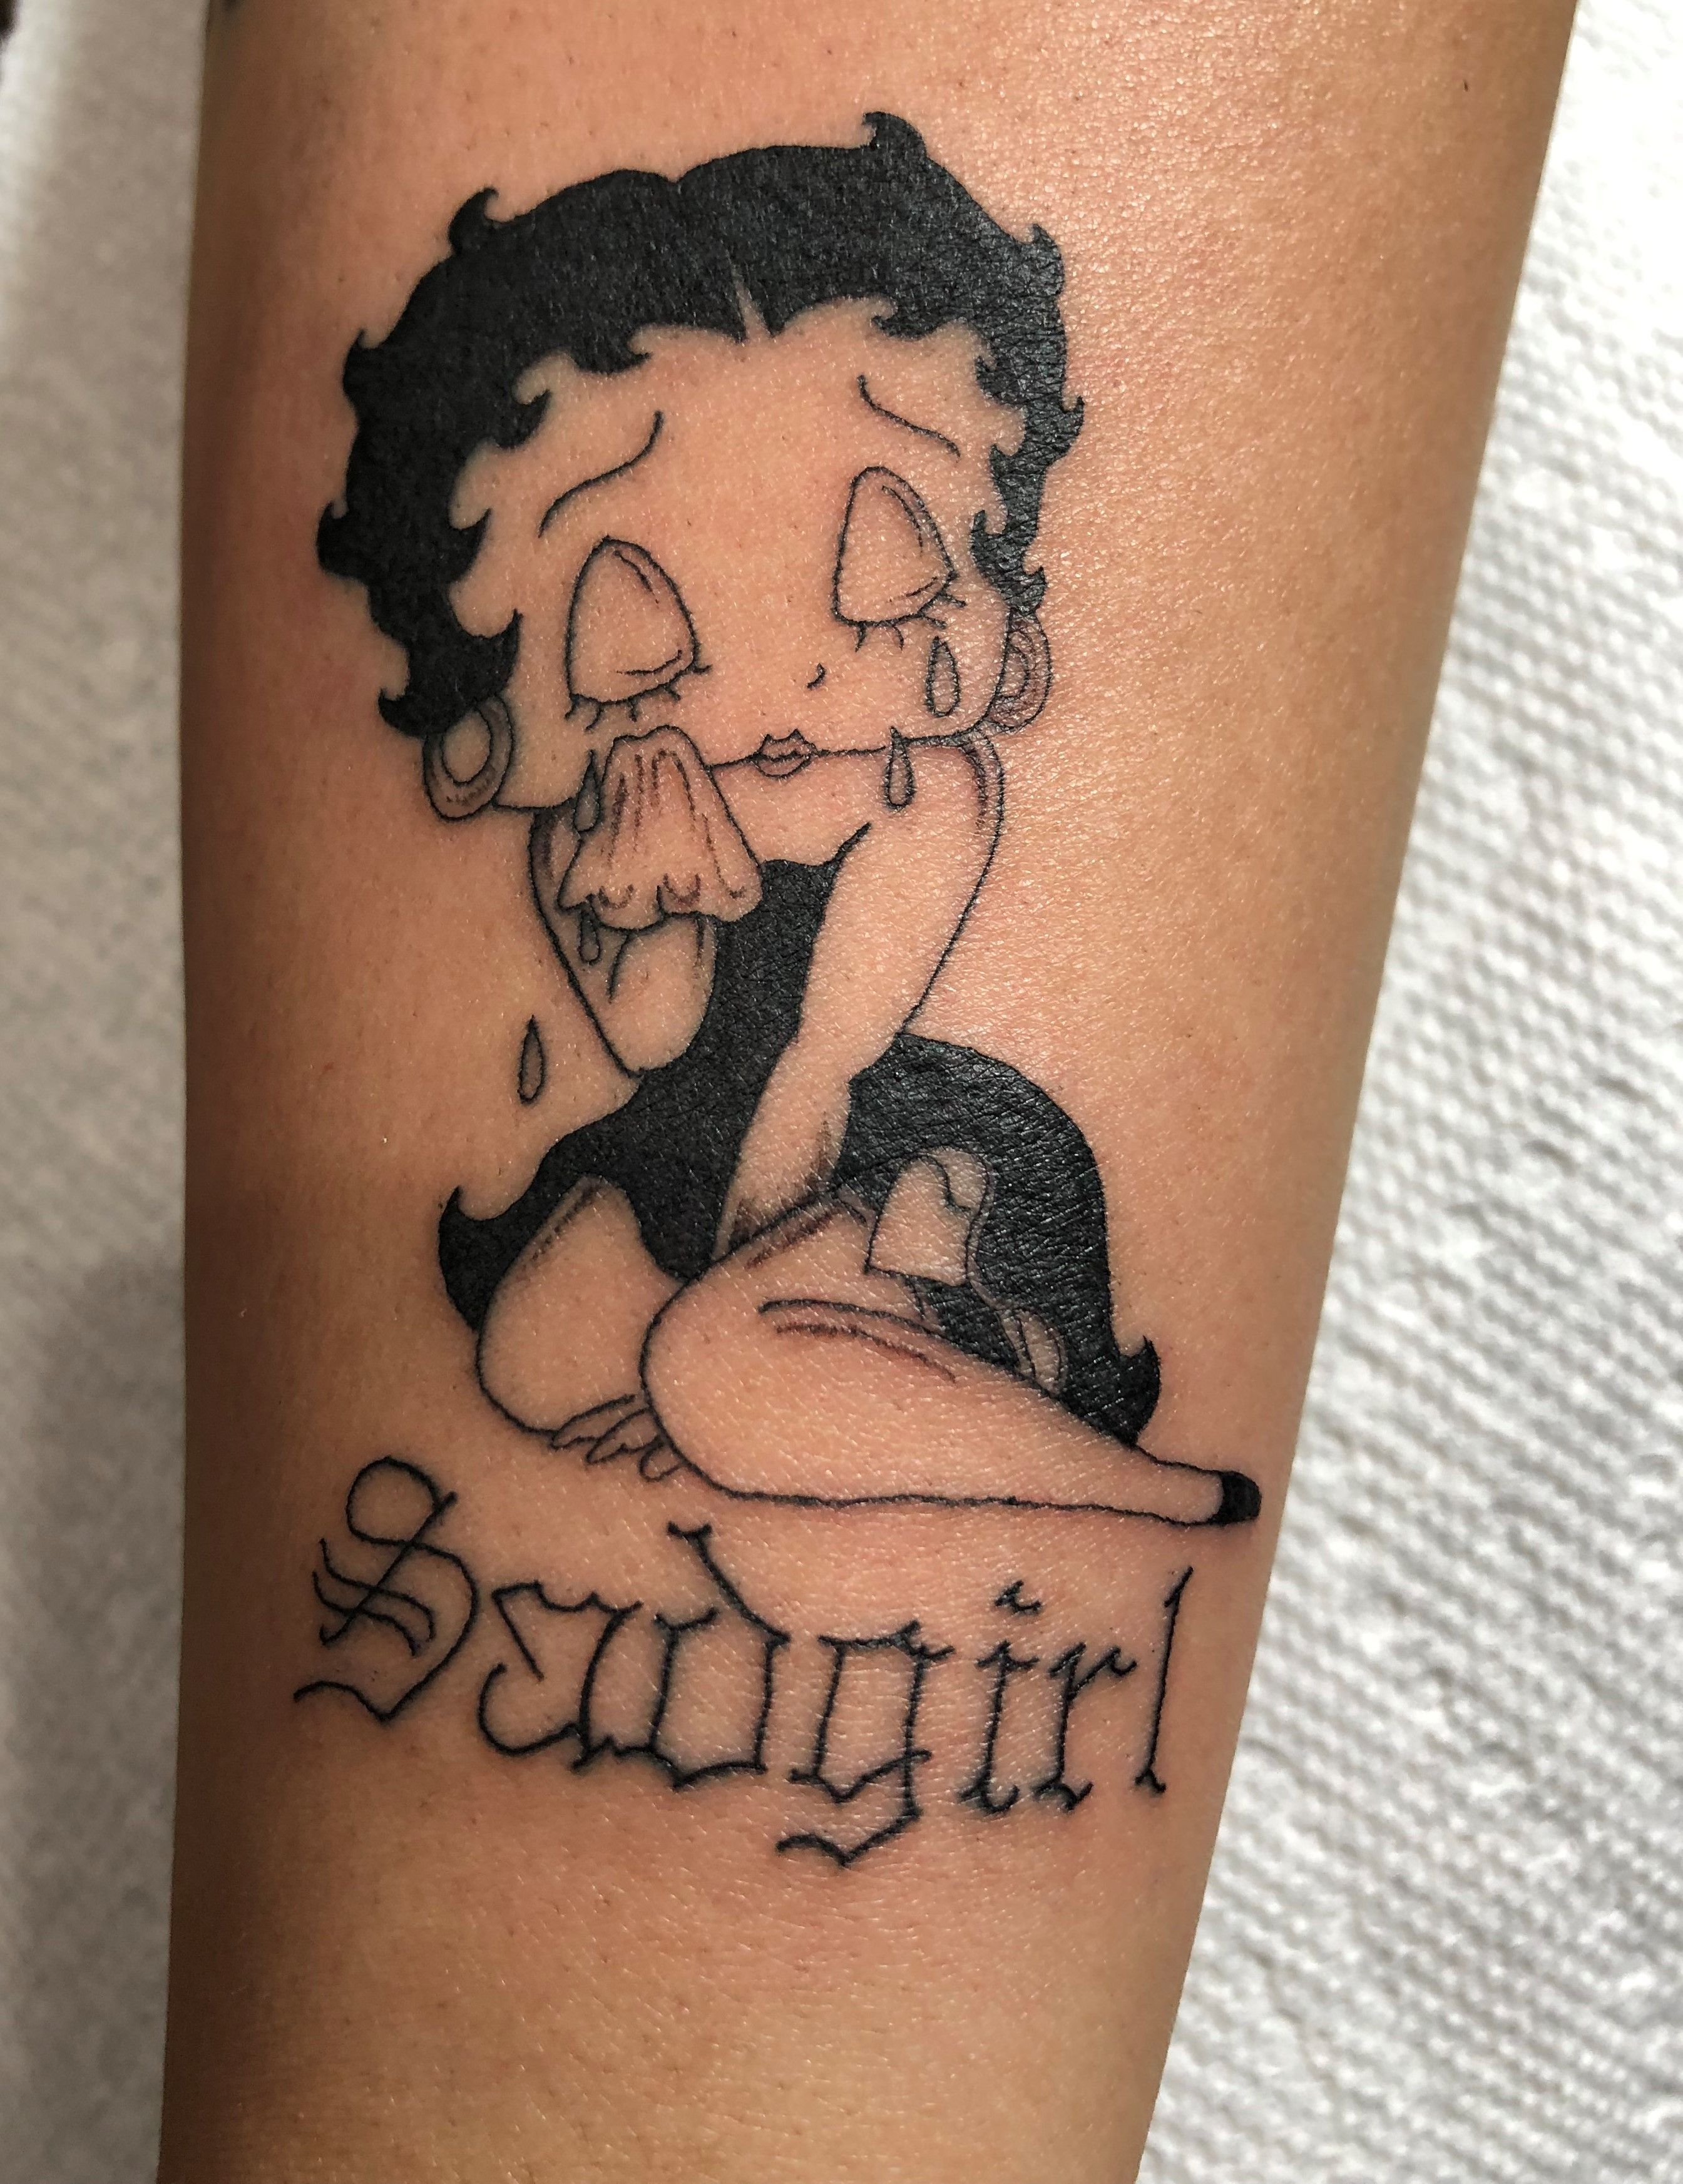 MF B BOOP For the legendary Demi Thank you again you always get the  best shit  bettyboop tattoo  Instagram